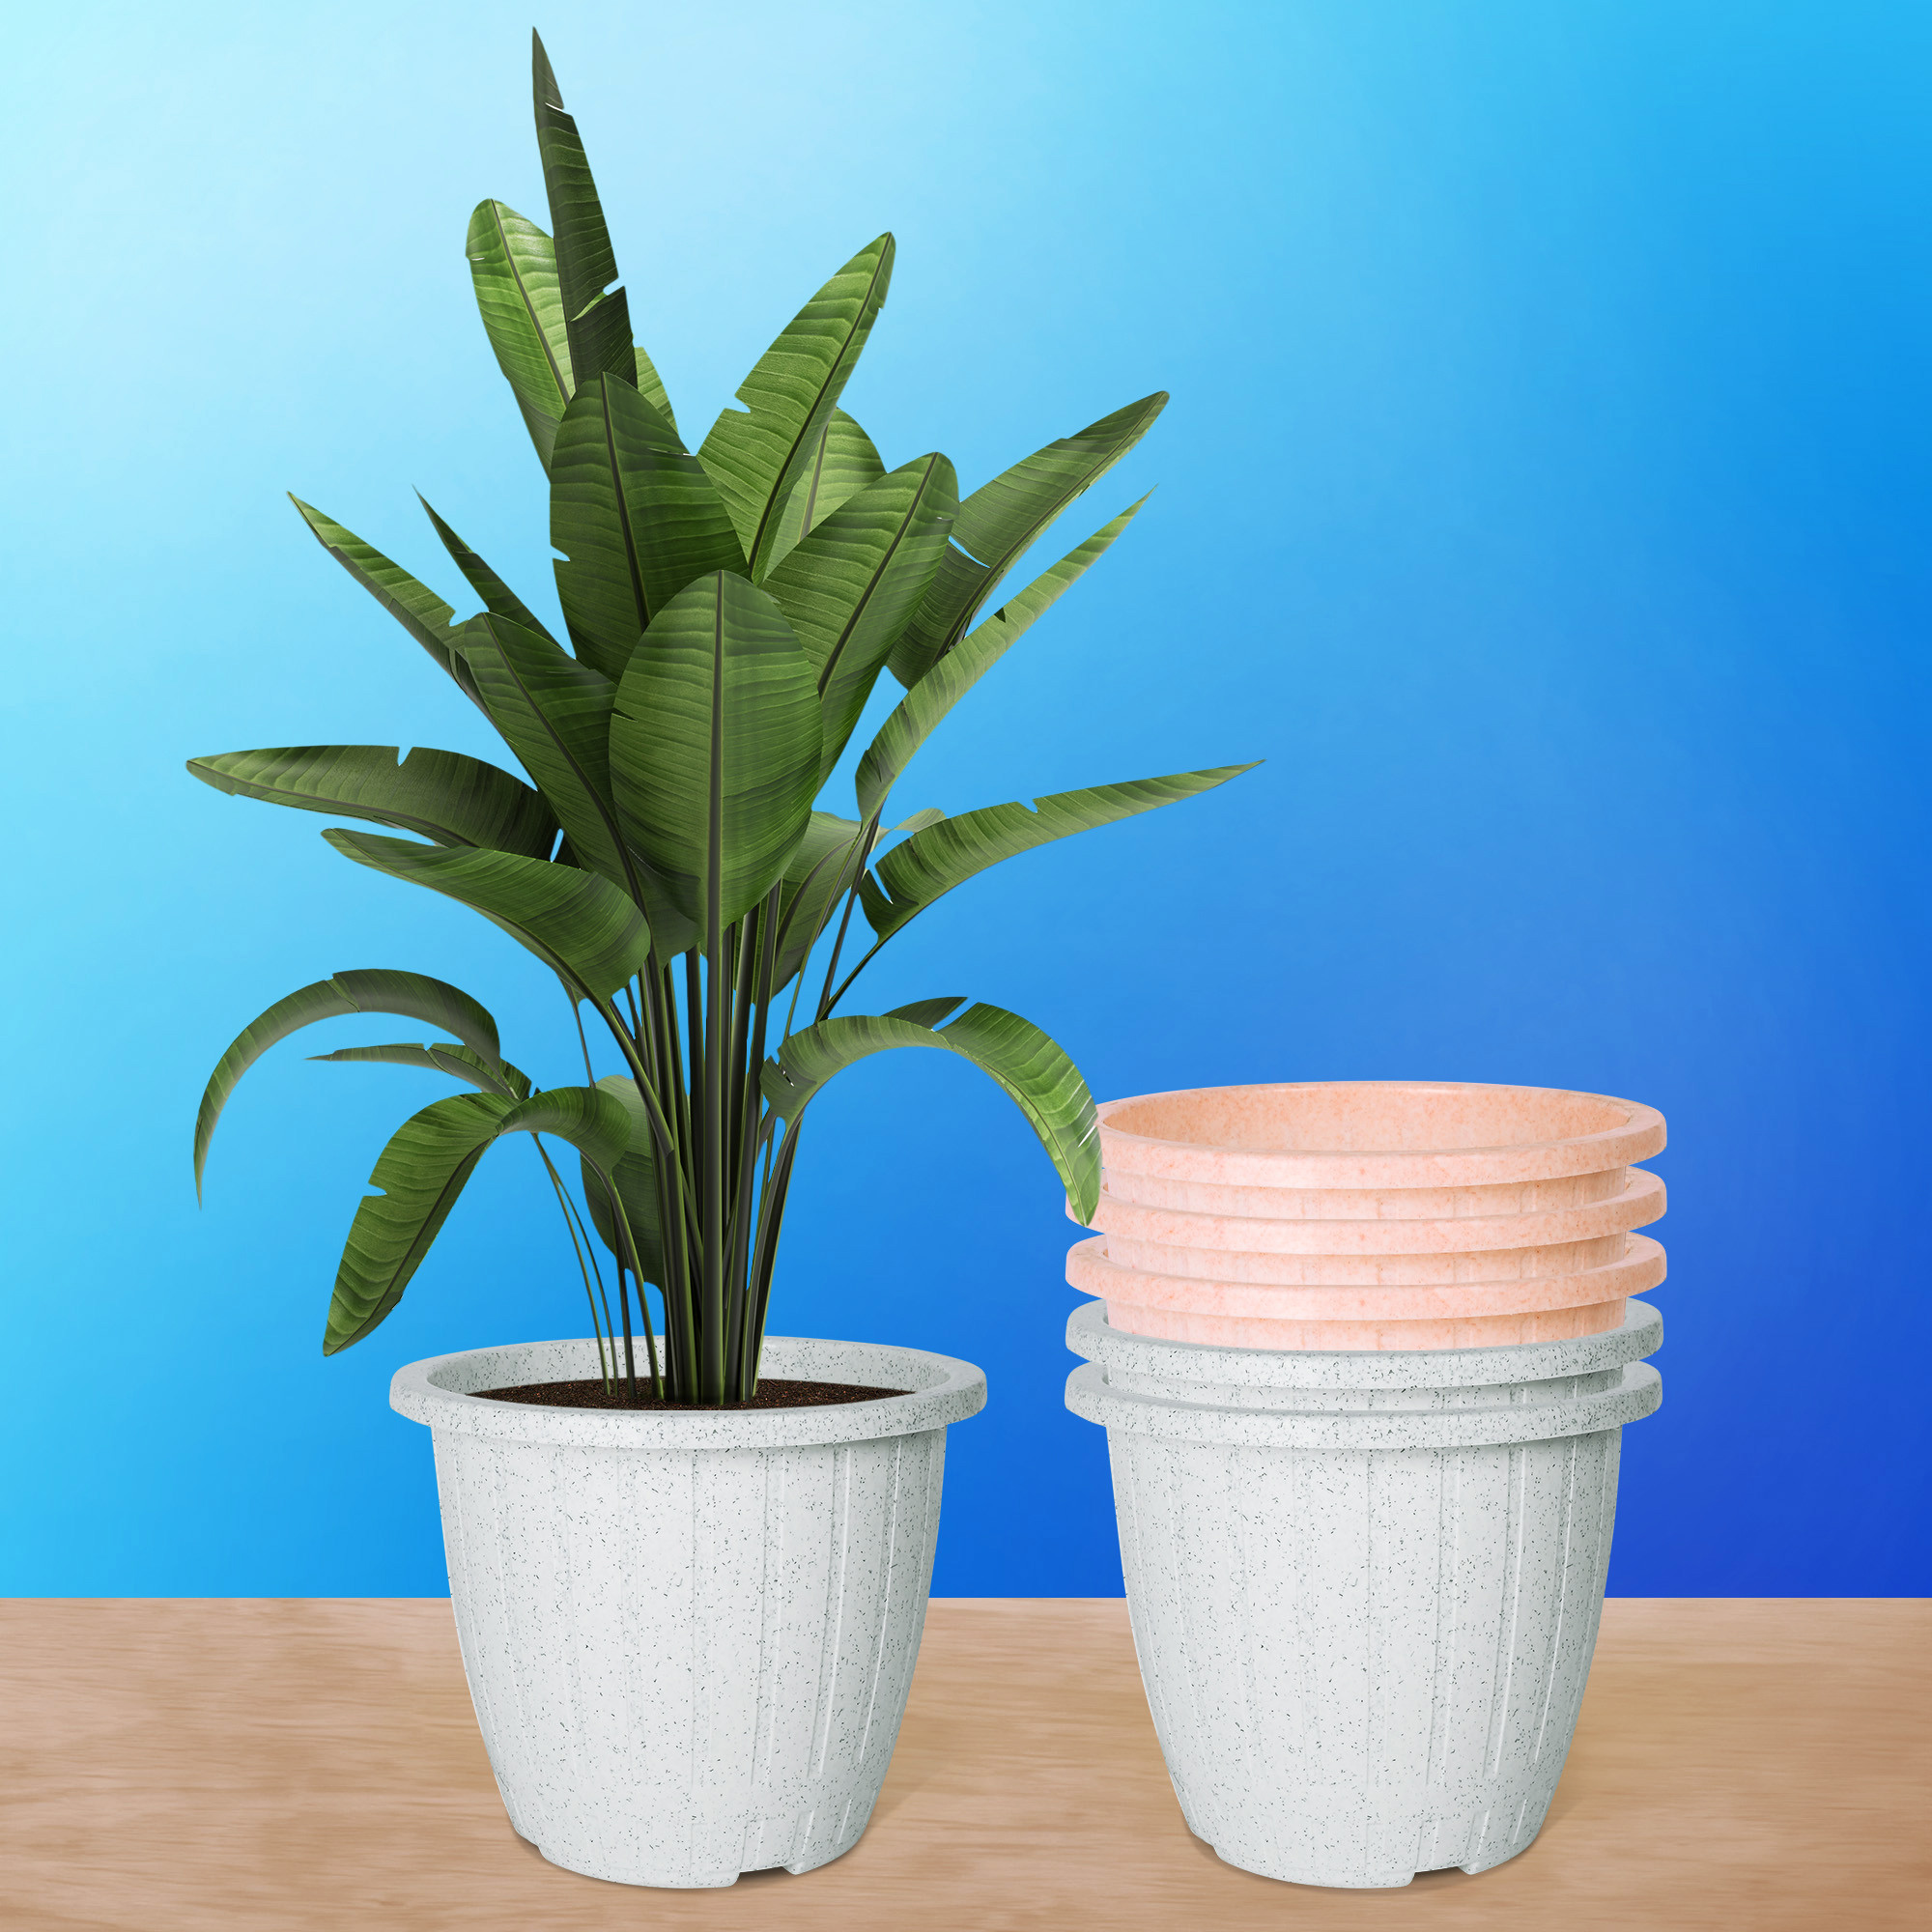 Kuber Industries Flower Pot | Flower Pot for Living Room | Planters for Home-Lawns & Gardening | Window Flower Pots for Balcony | Marble Duro | 8 Inch | White & Peach